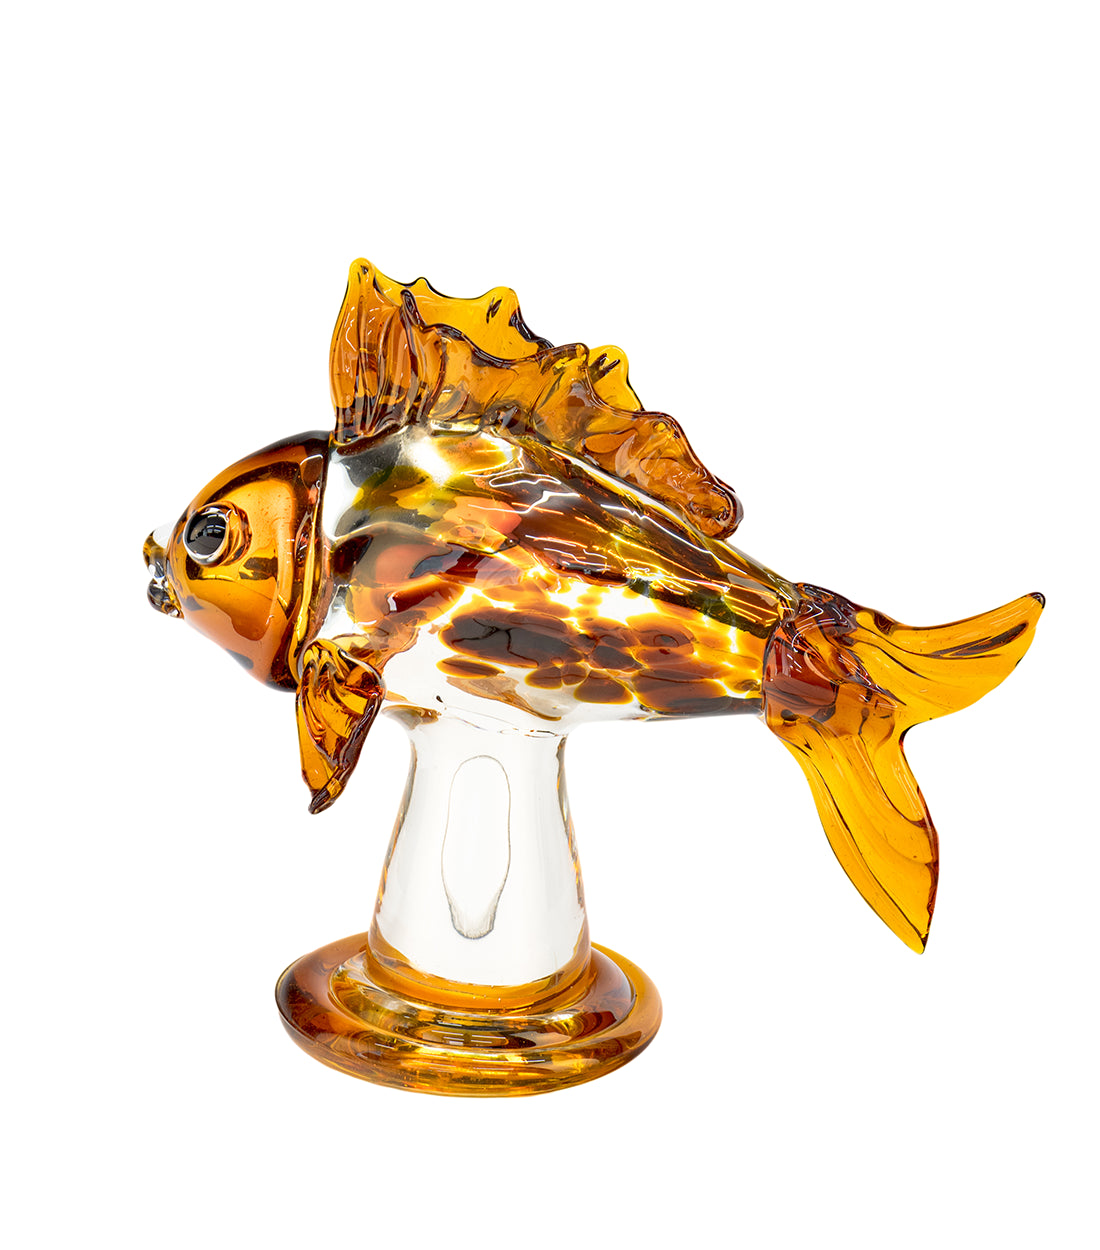 JIRI PACINEK - Seventh Heaven’s Gold Fish - Unique Fish Figuirine Perfect for Centre Table and Gifting.